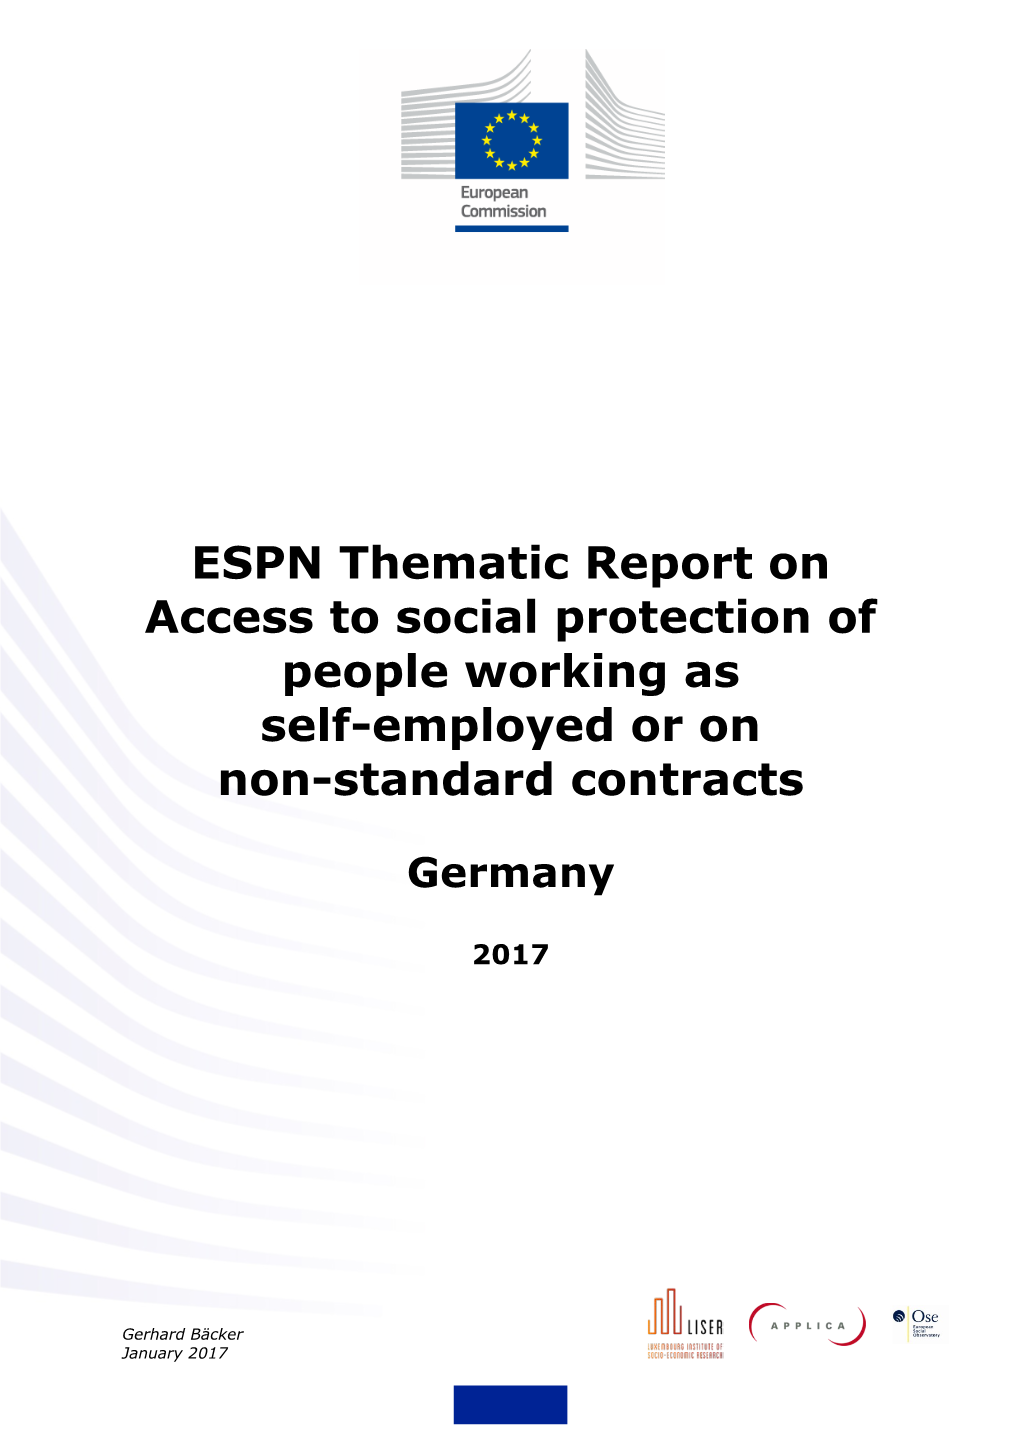 ESPN Thematic Report on Access to Social Protection of People Working As Self-Employed Or on Non-Standard Contracts